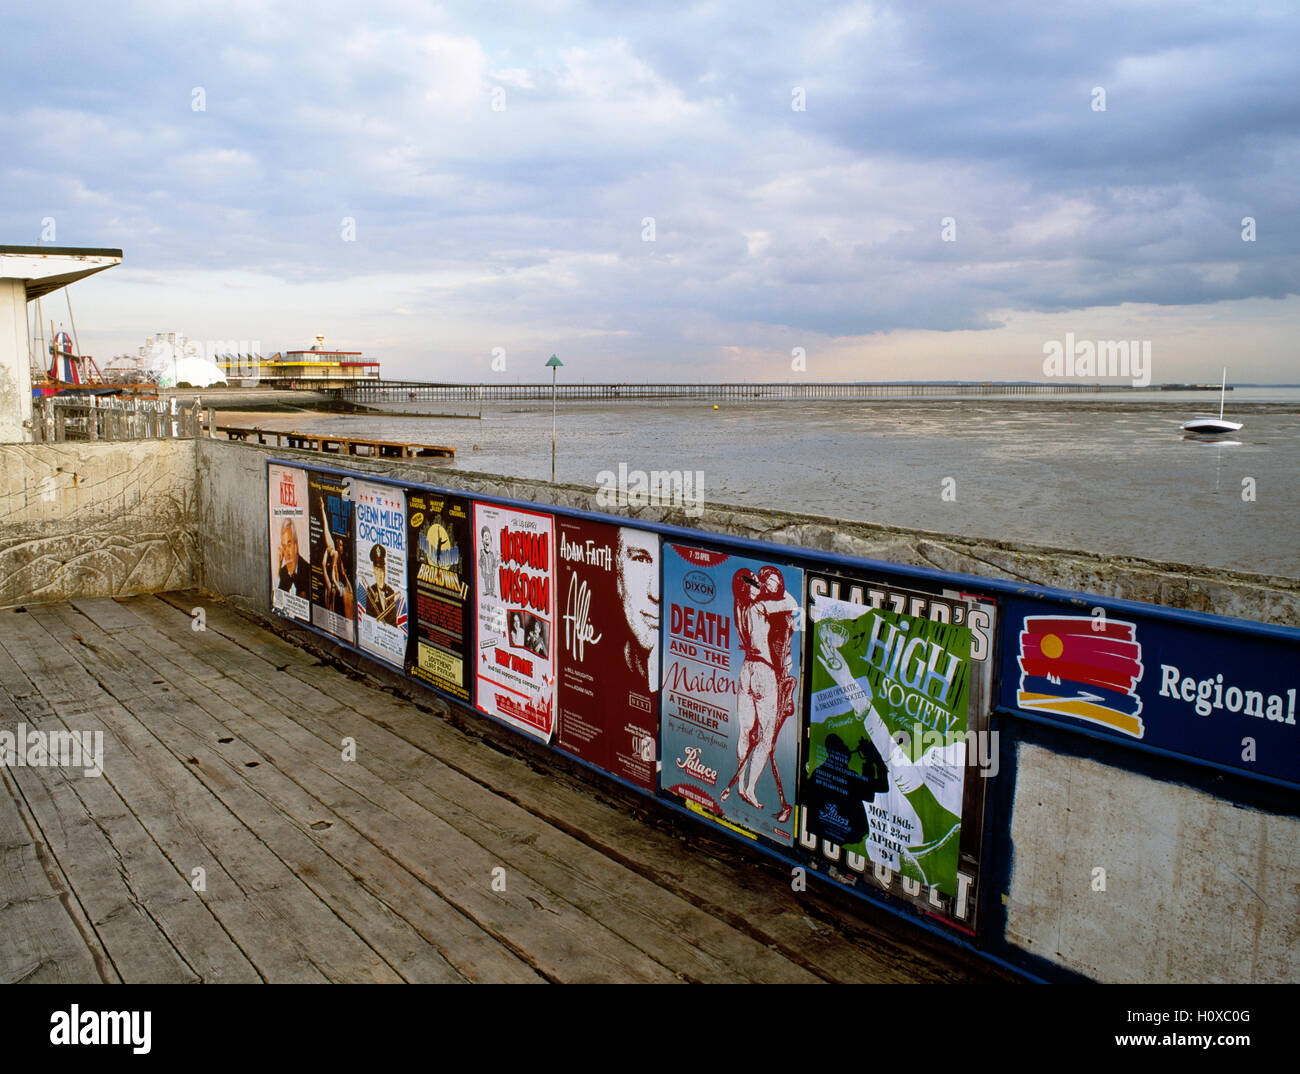 Old theatre posters on a billboard overlooking the estuary and Southend pier, Essex, England, UK. Photo taken 1994. Stock Photo